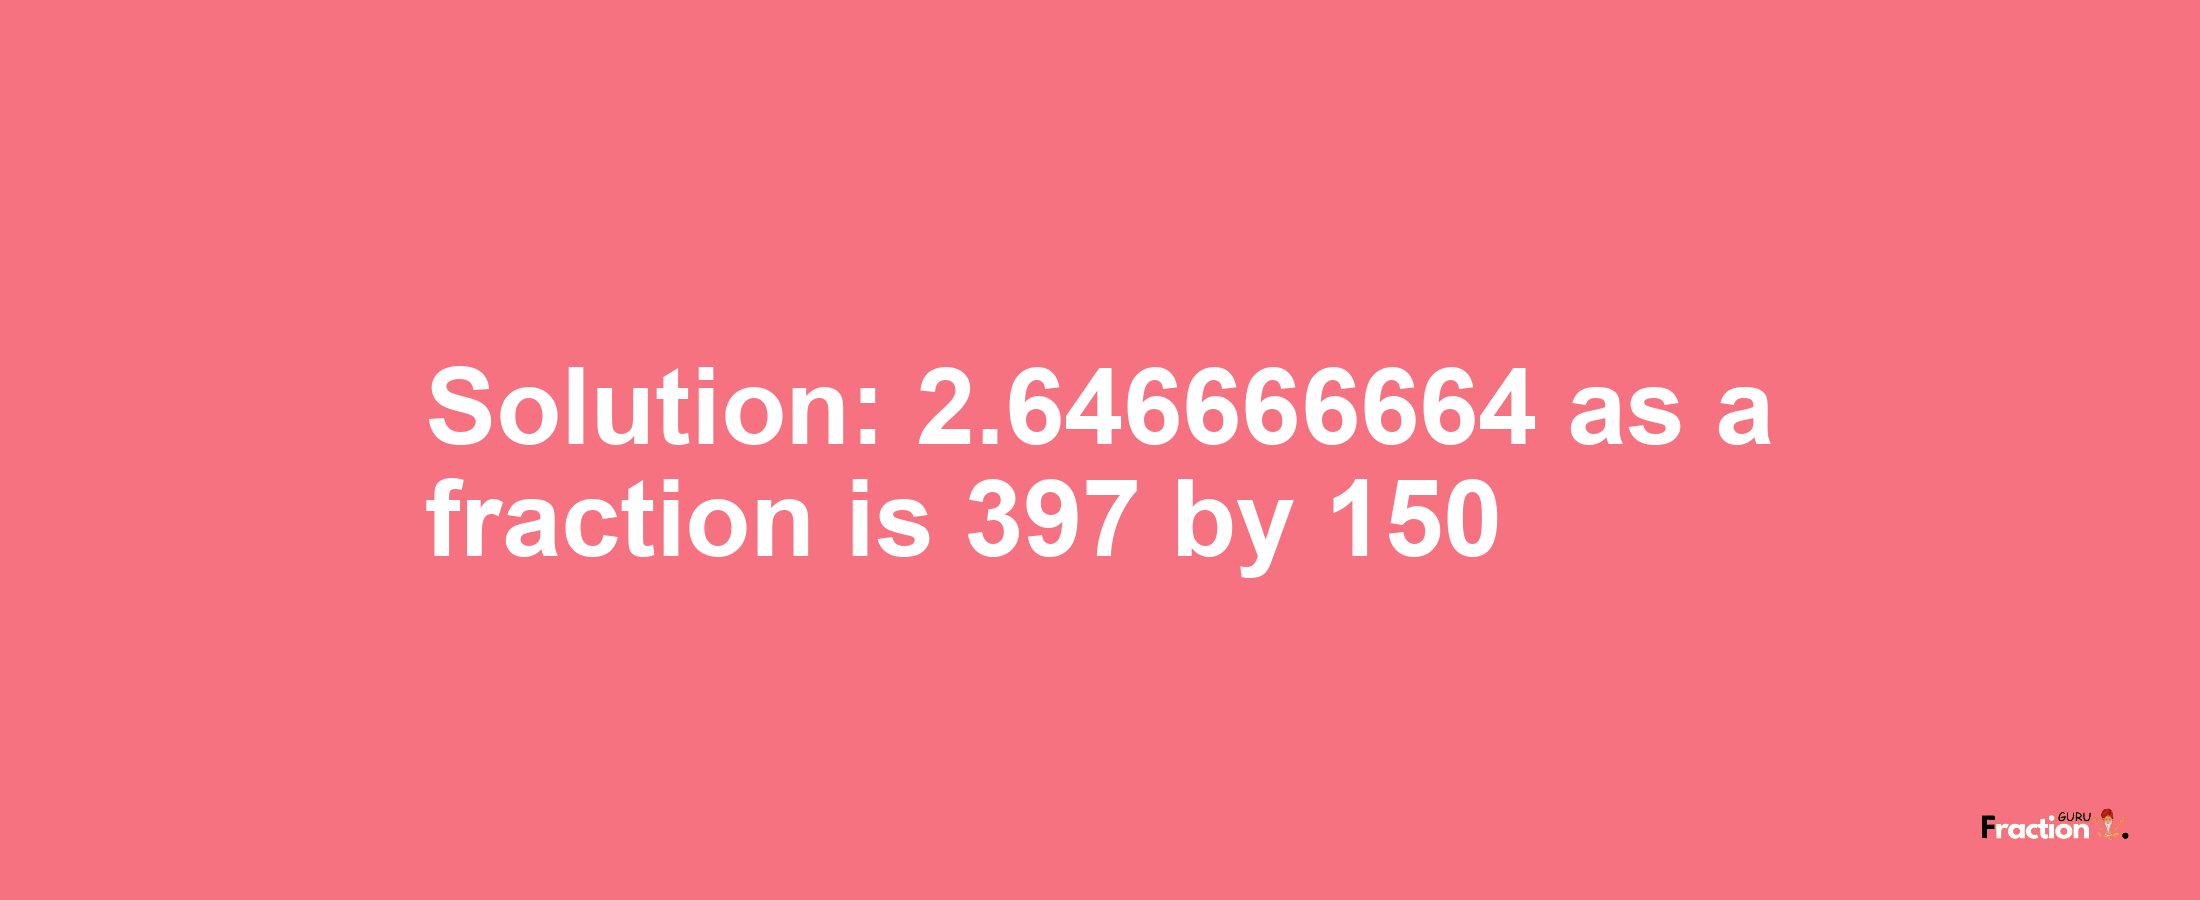 Solution:2.646666664 as a fraction is 397/150